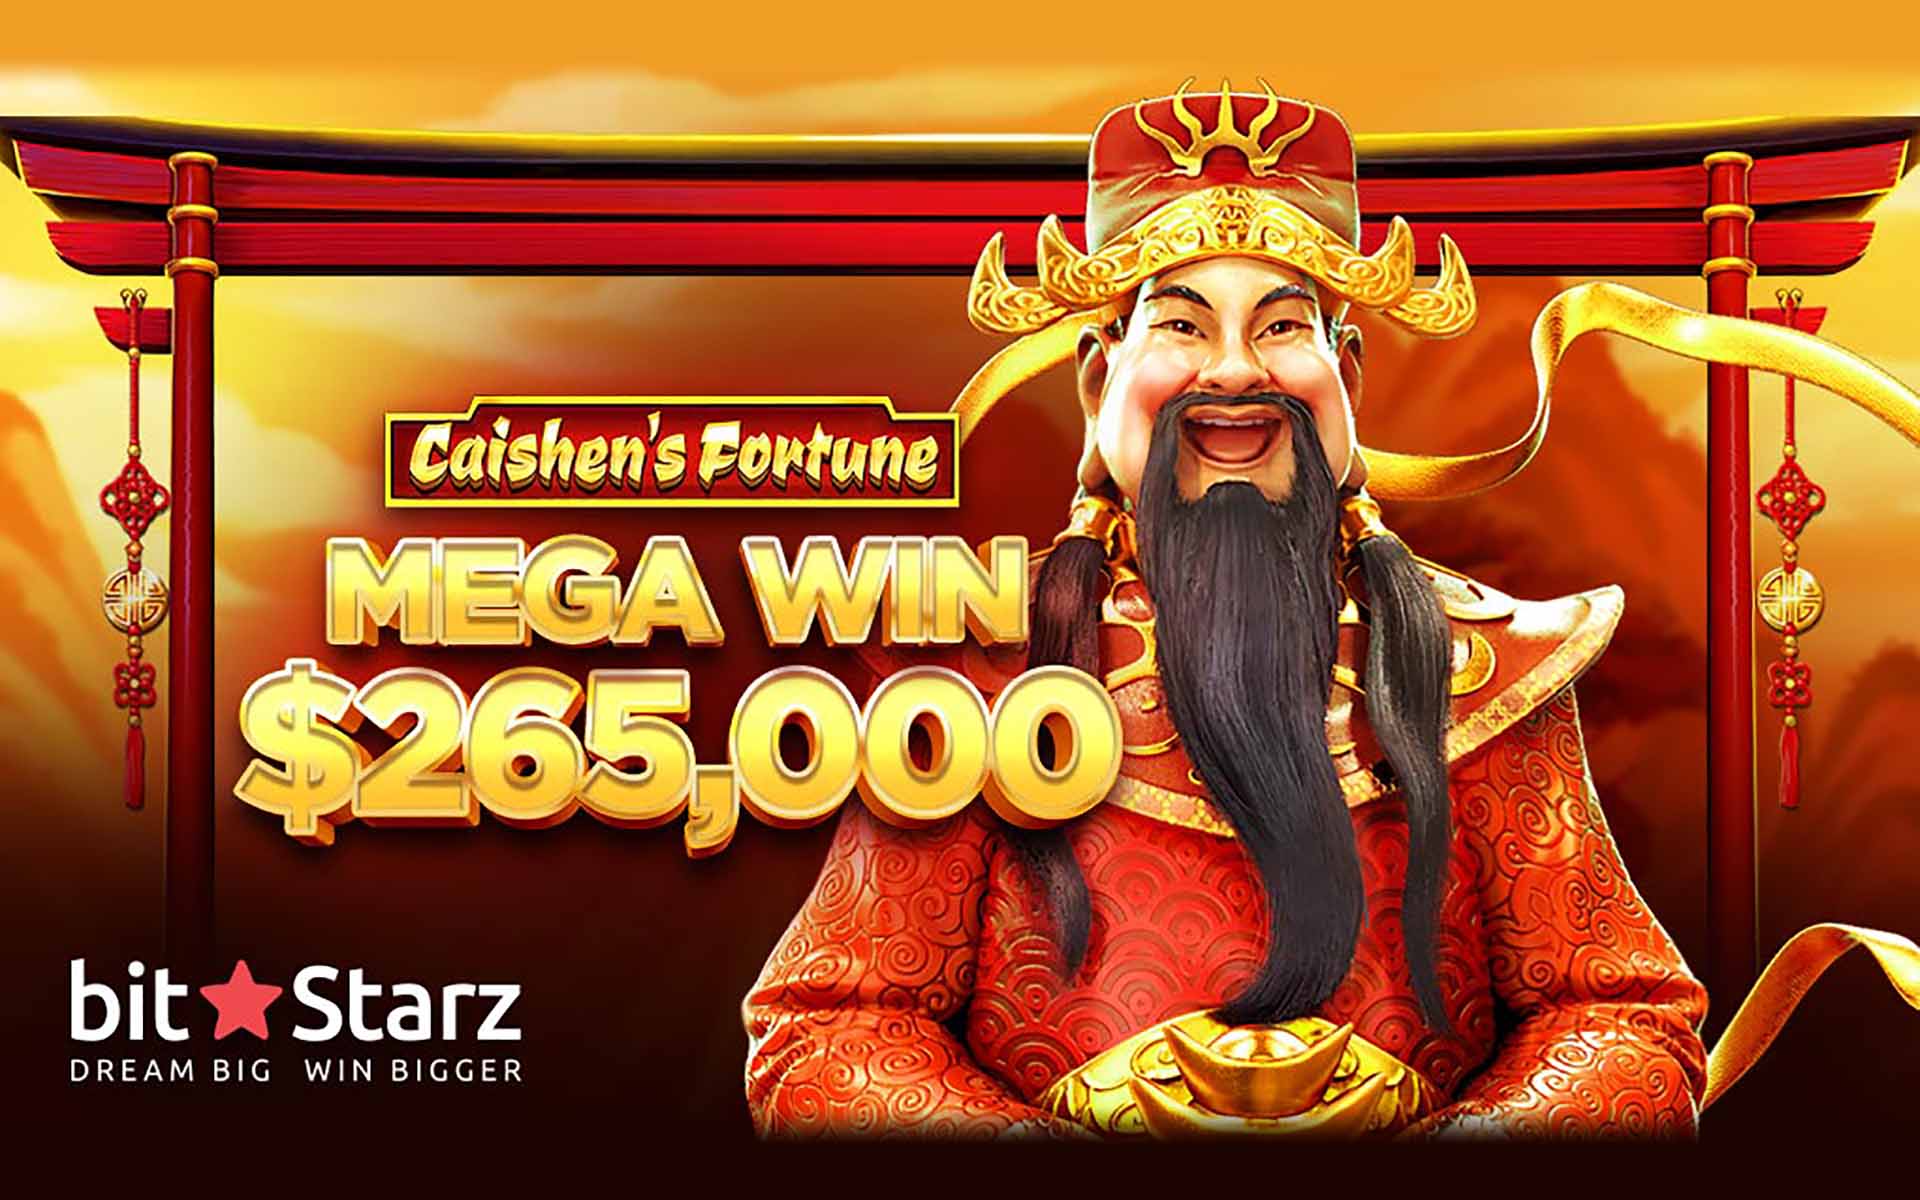 Another Huge Prize Falls at BitStarz, Lucky Player Scoops $265,000 Win!